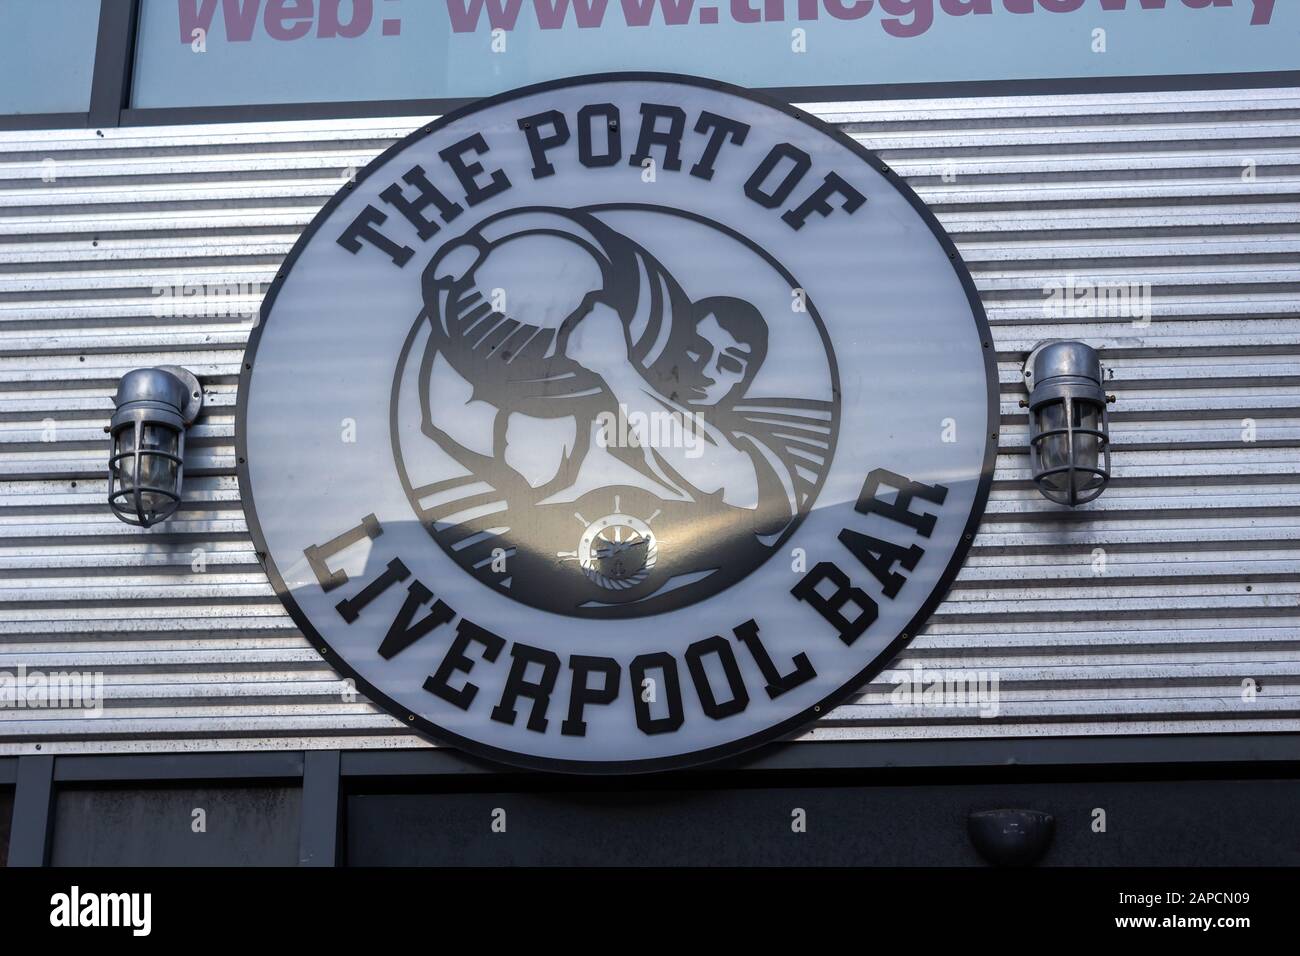 The Port of Liverpoool bar and restaurant sign and logo of strongman carrying beer barrel cask, London road, Liverpool Stock Photo